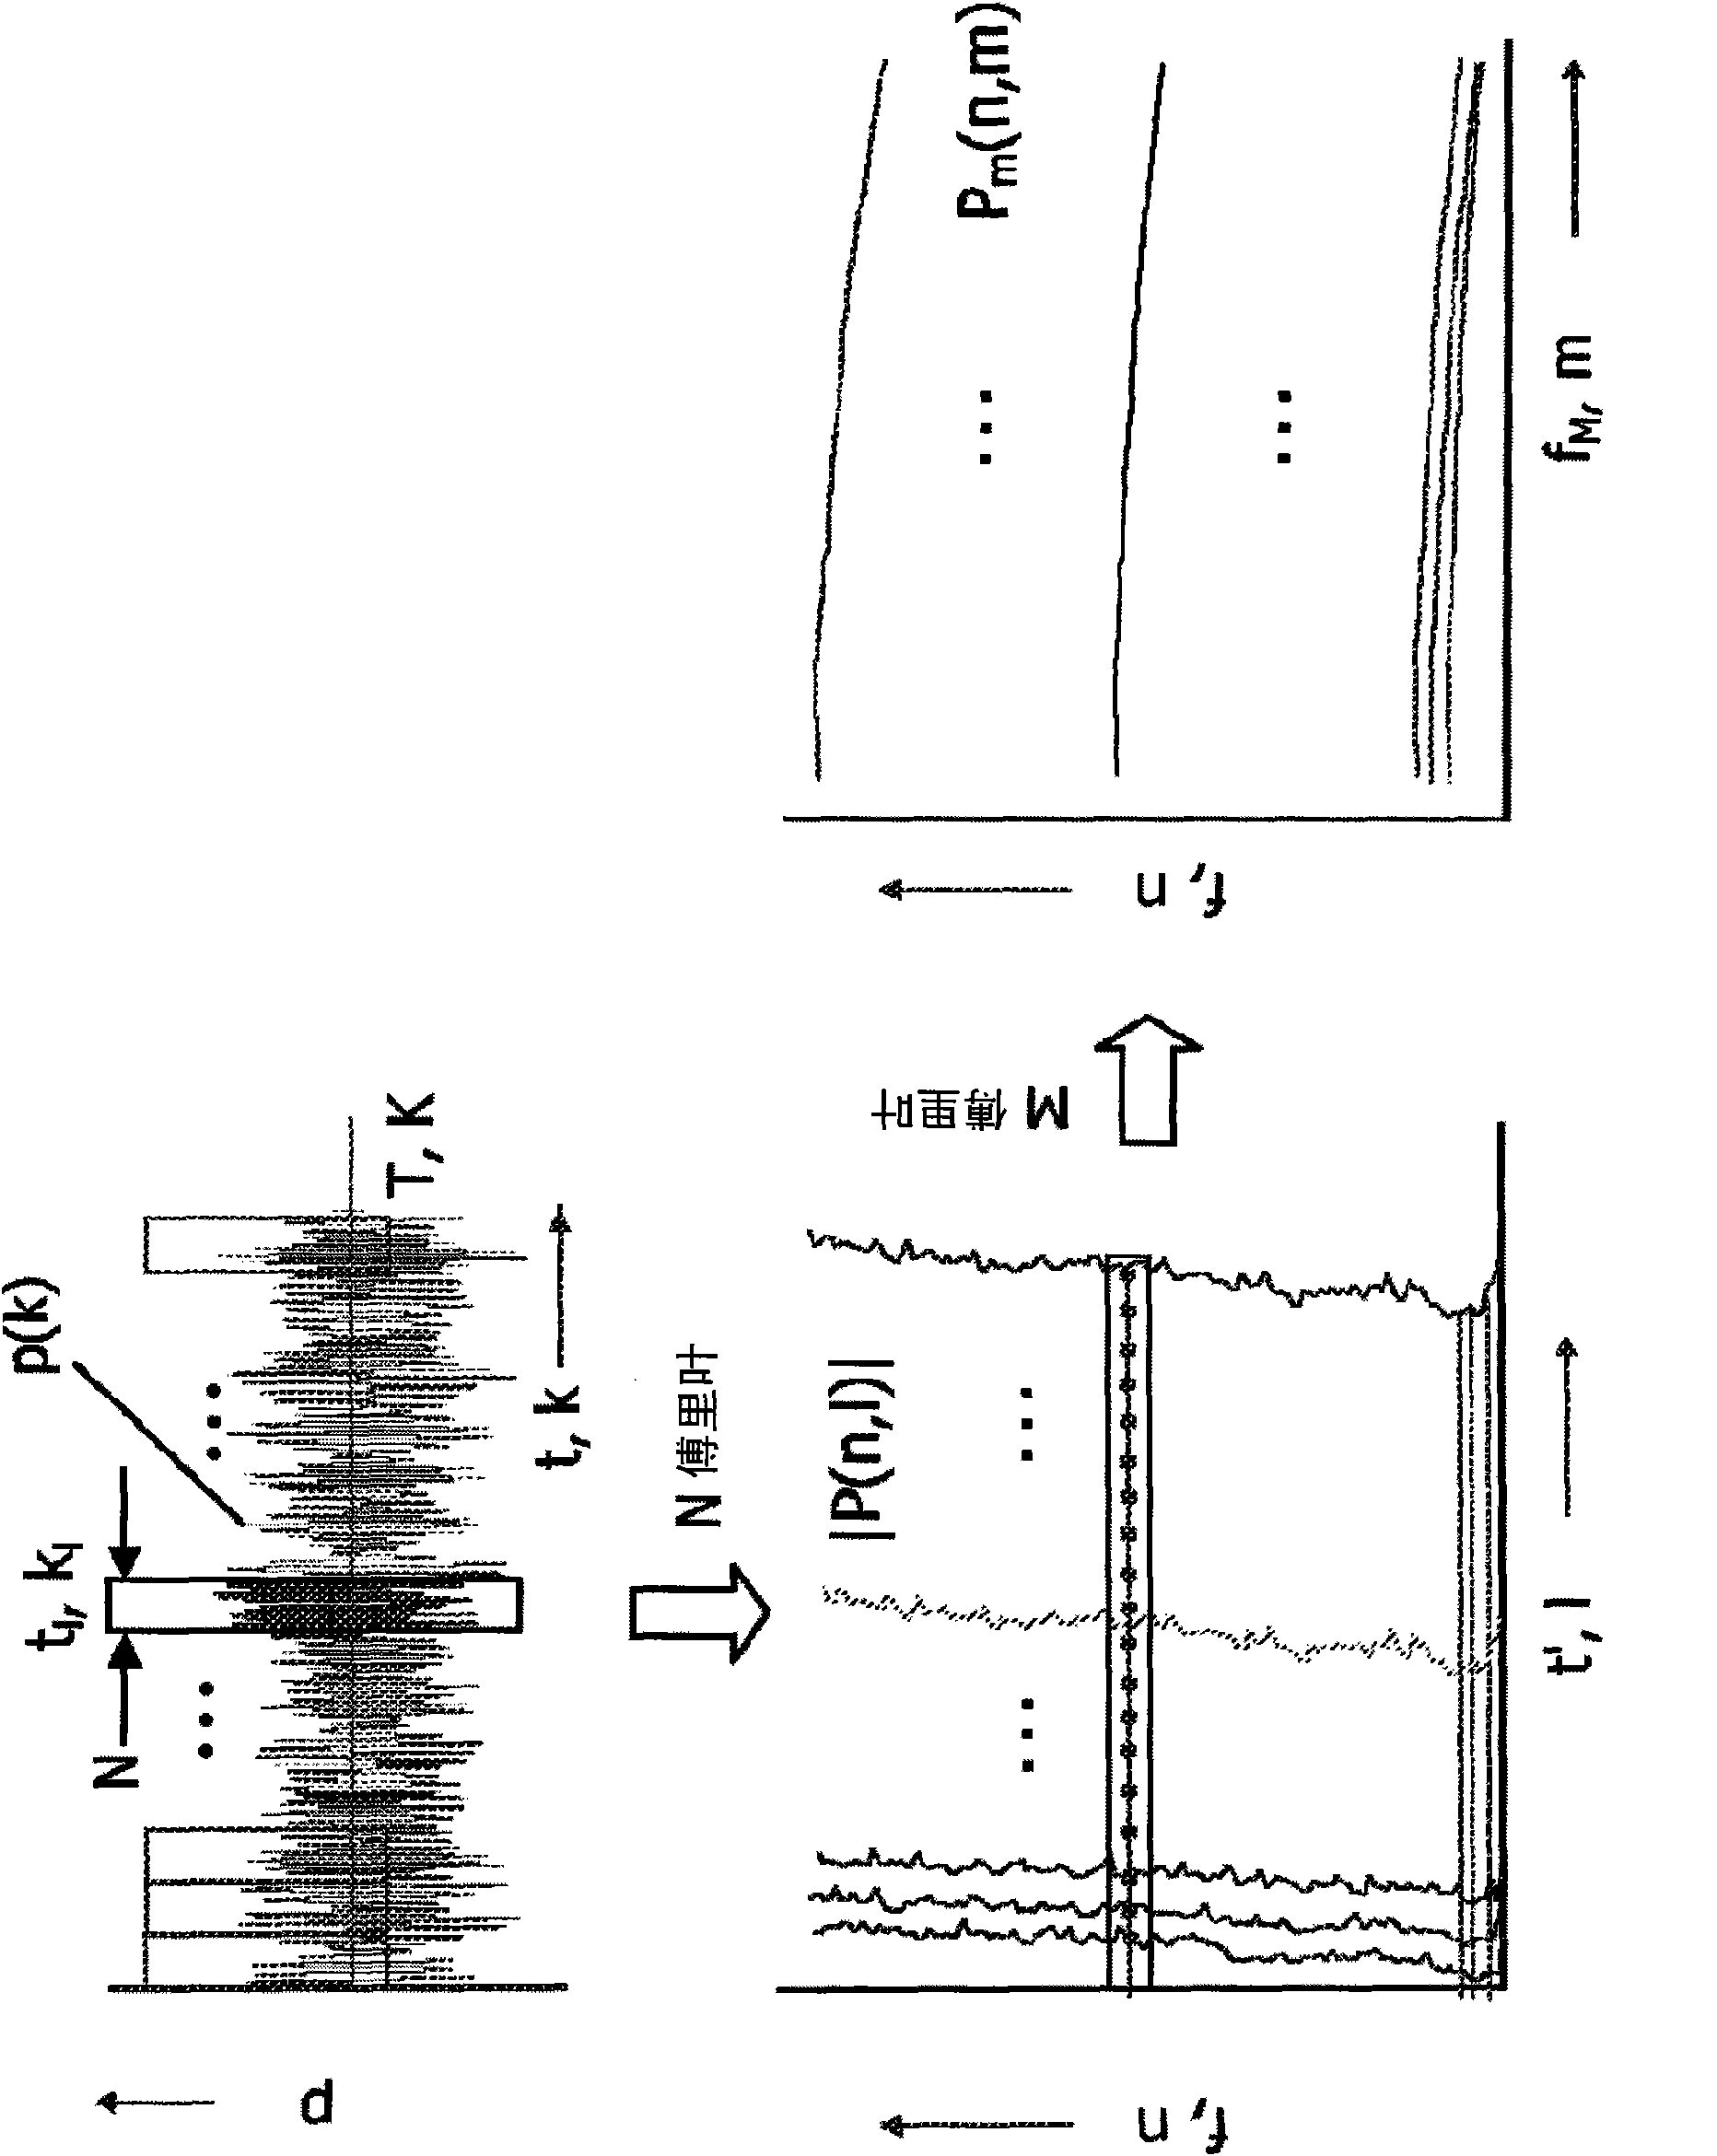 Method and equipment for analyzing noise source, especially noise of vehicle